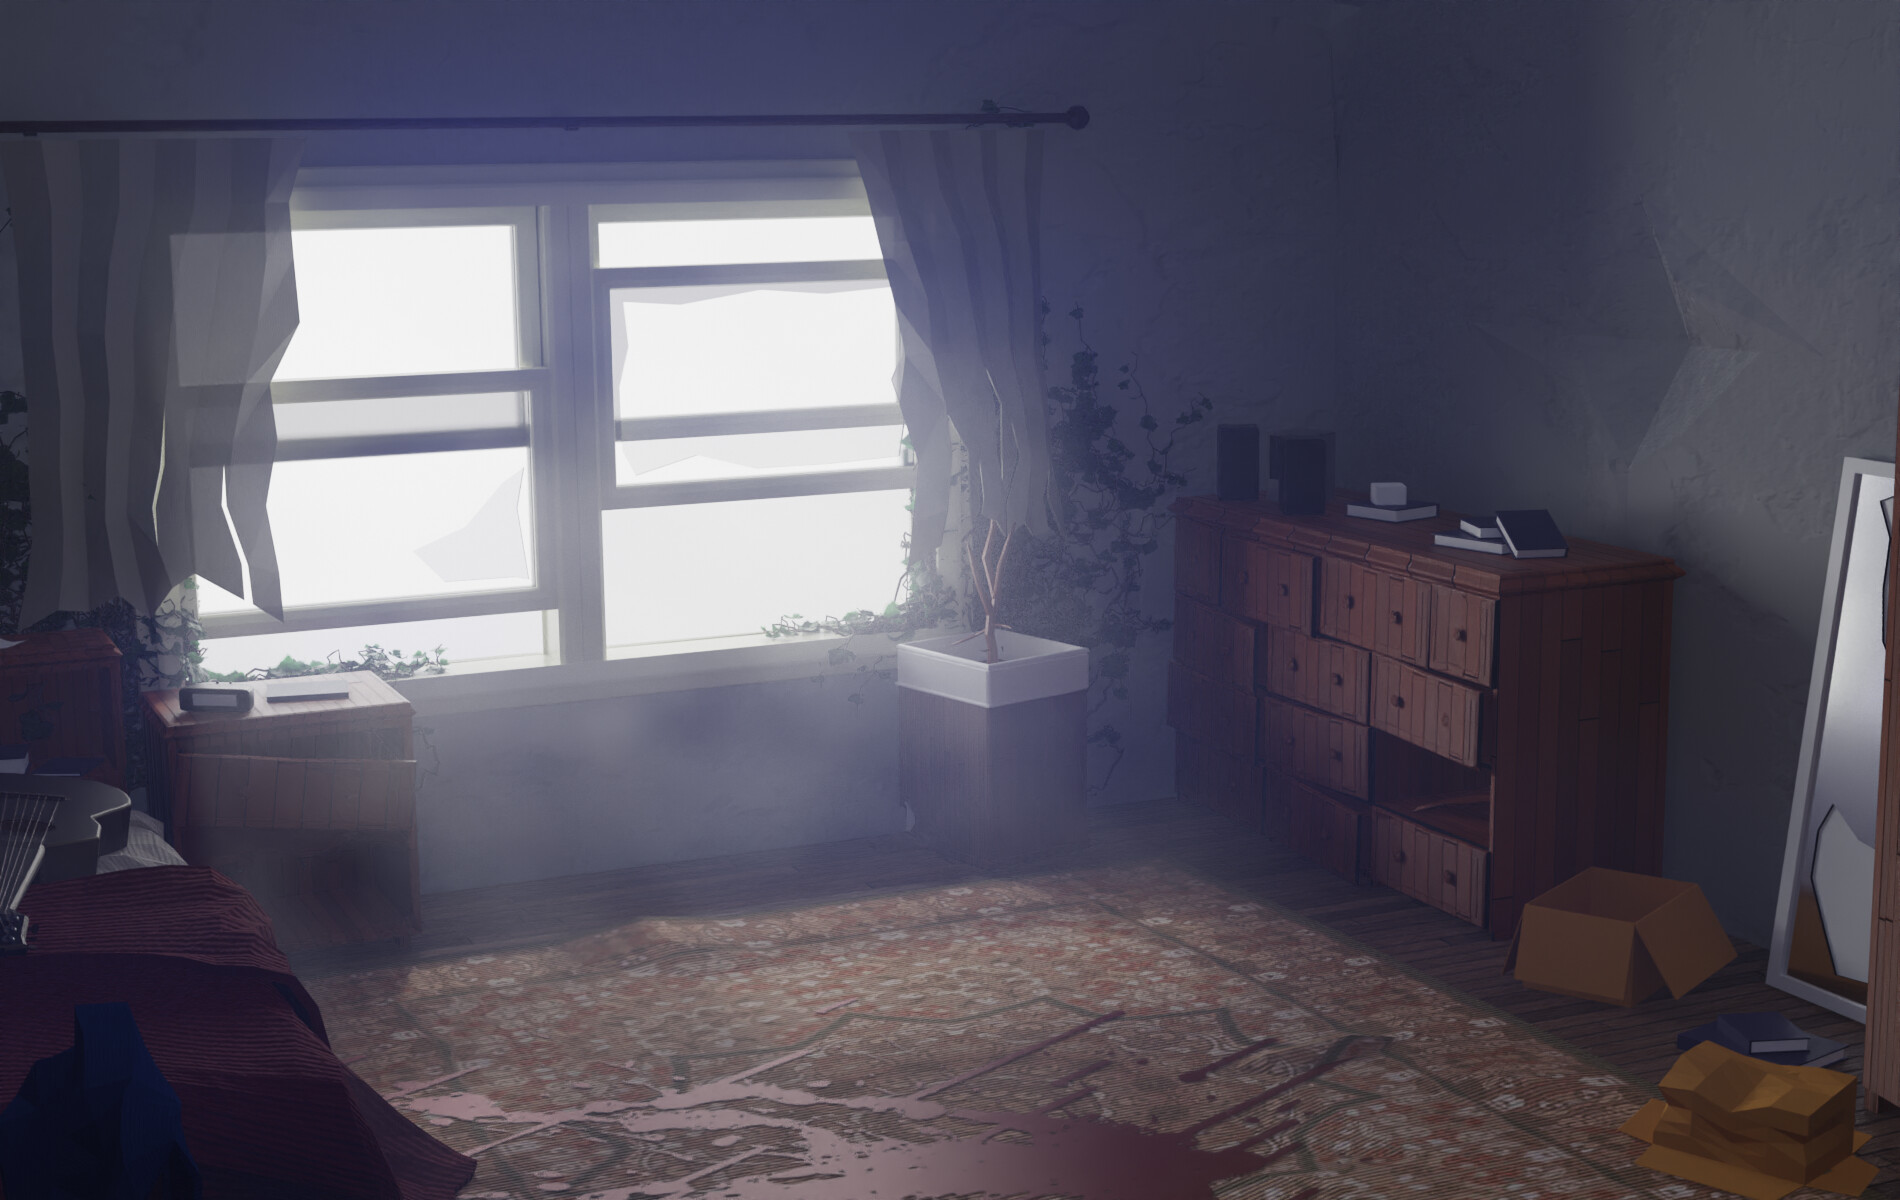 ArtStation - Abandoned room from The Last Of Us Part II Trailer